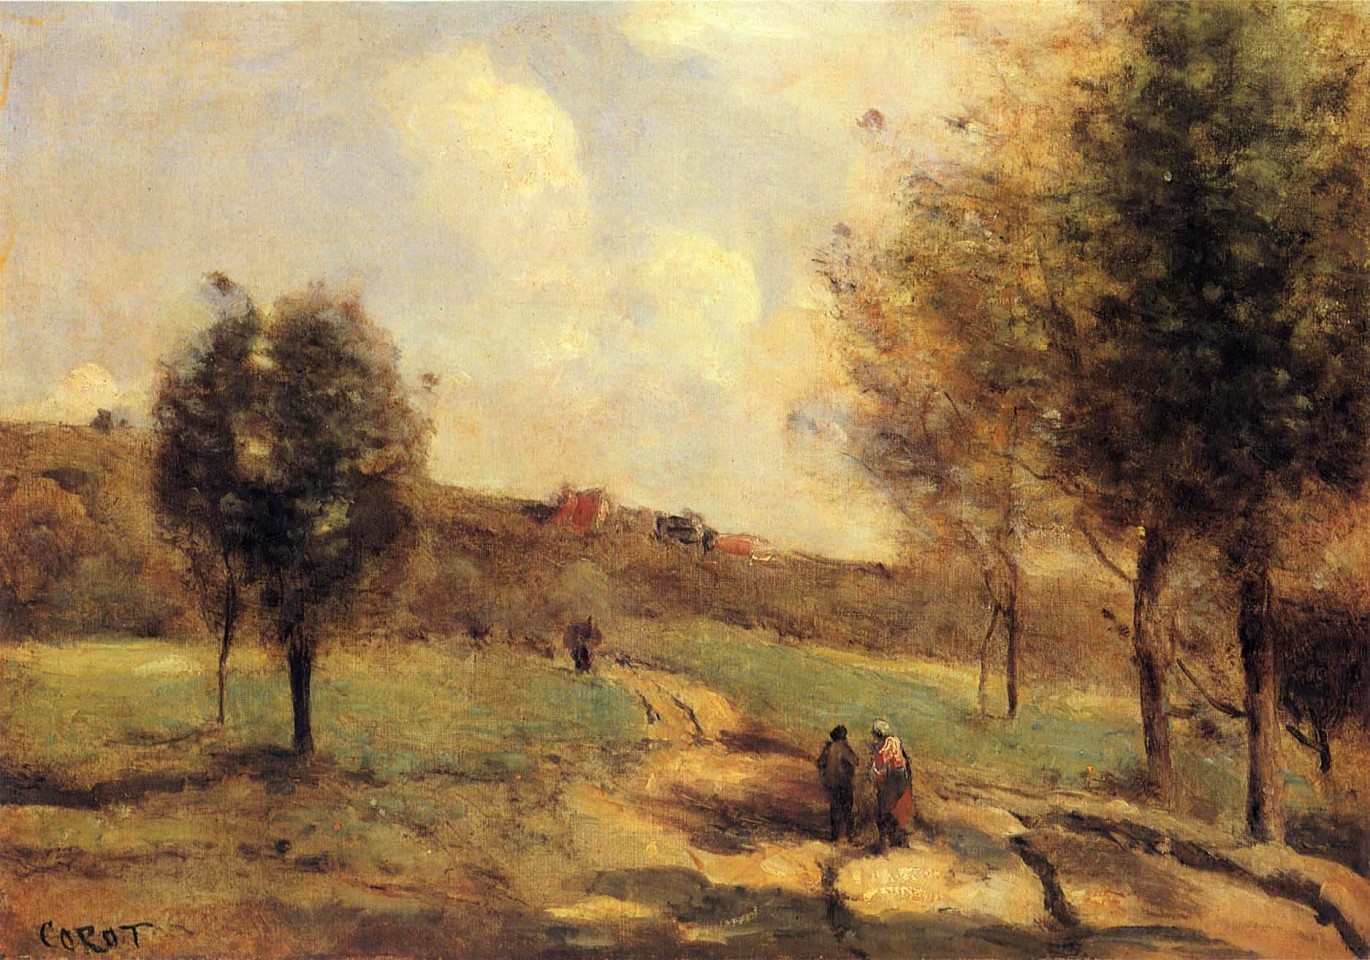 Jean Baptiste Camille Corot, Coubron - Route Montante, ca. 1870
Oil on canvas, 10 x 14 in. (25.4 x 35.6 cm)
COR-007-PA